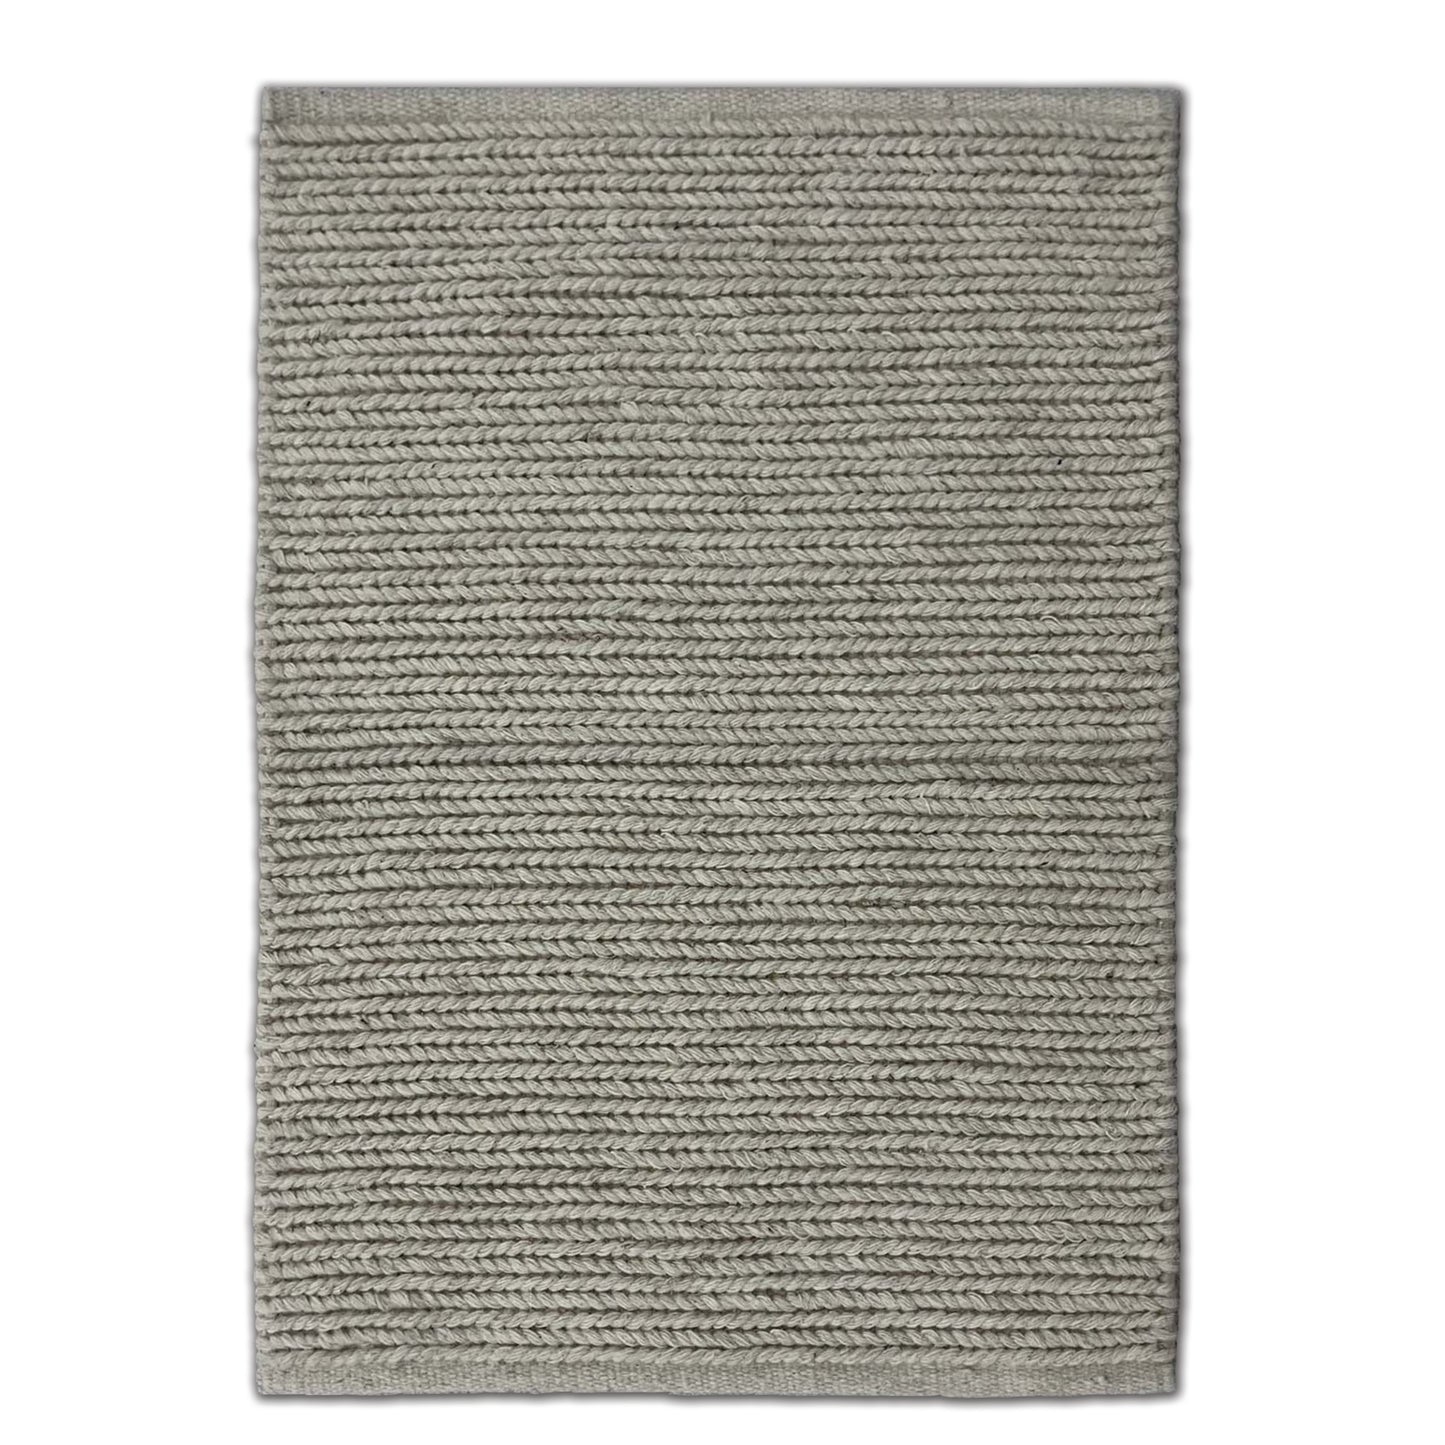 Sandstone Grey colour Braided wool rug, Sizes available